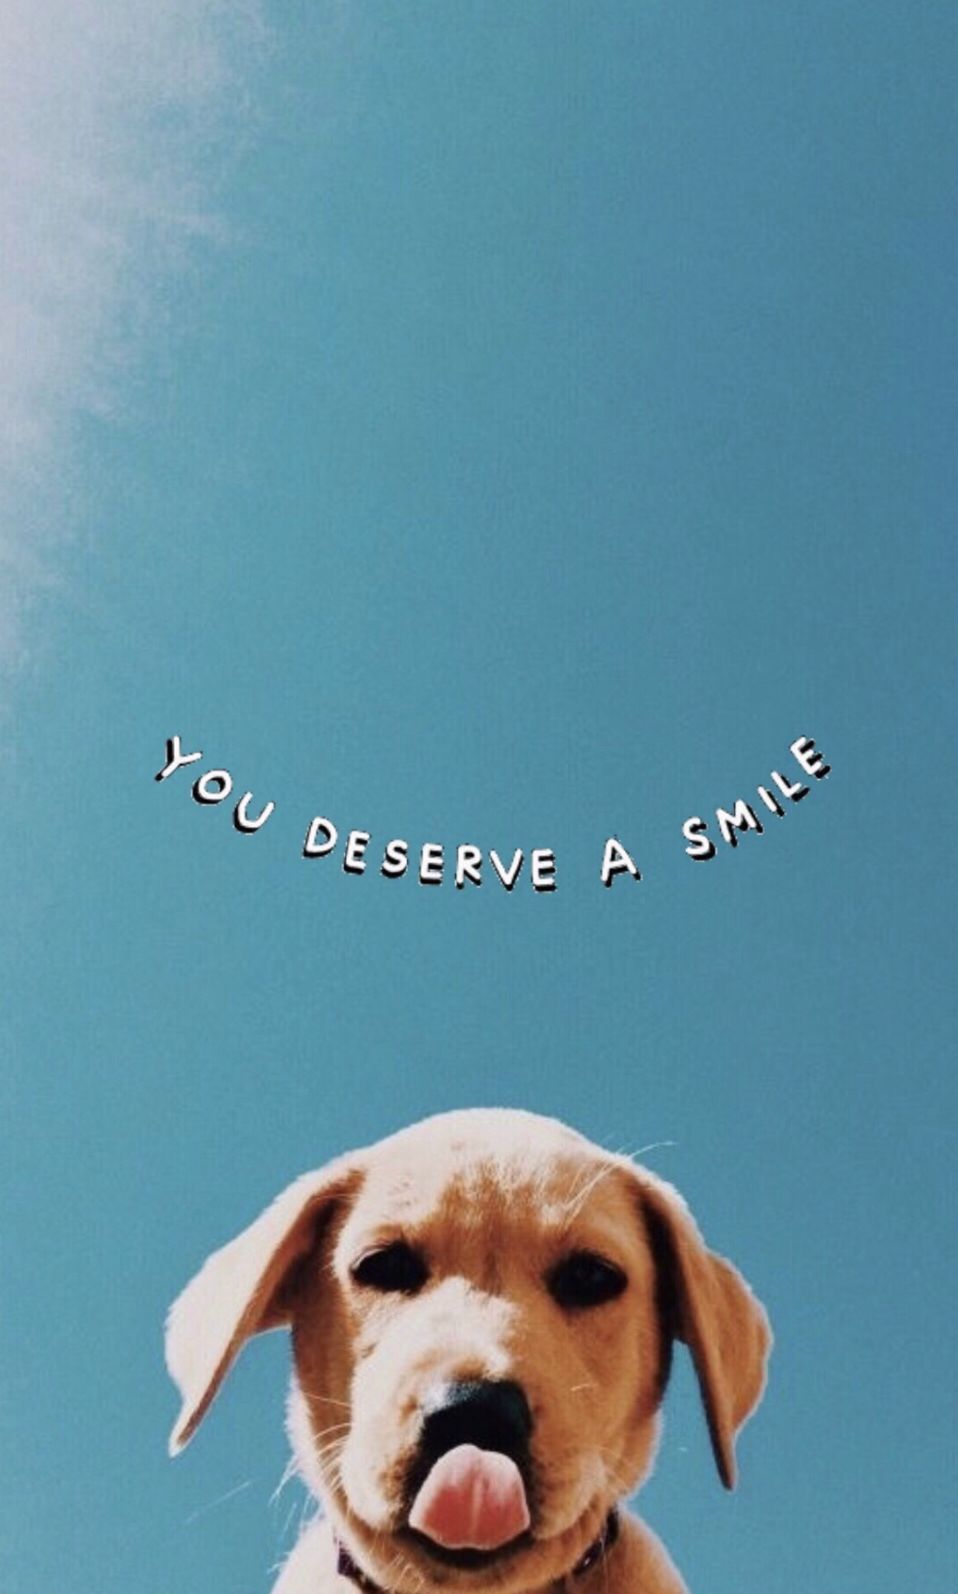 quotes. Funny iphone wallpaper, Cute dog